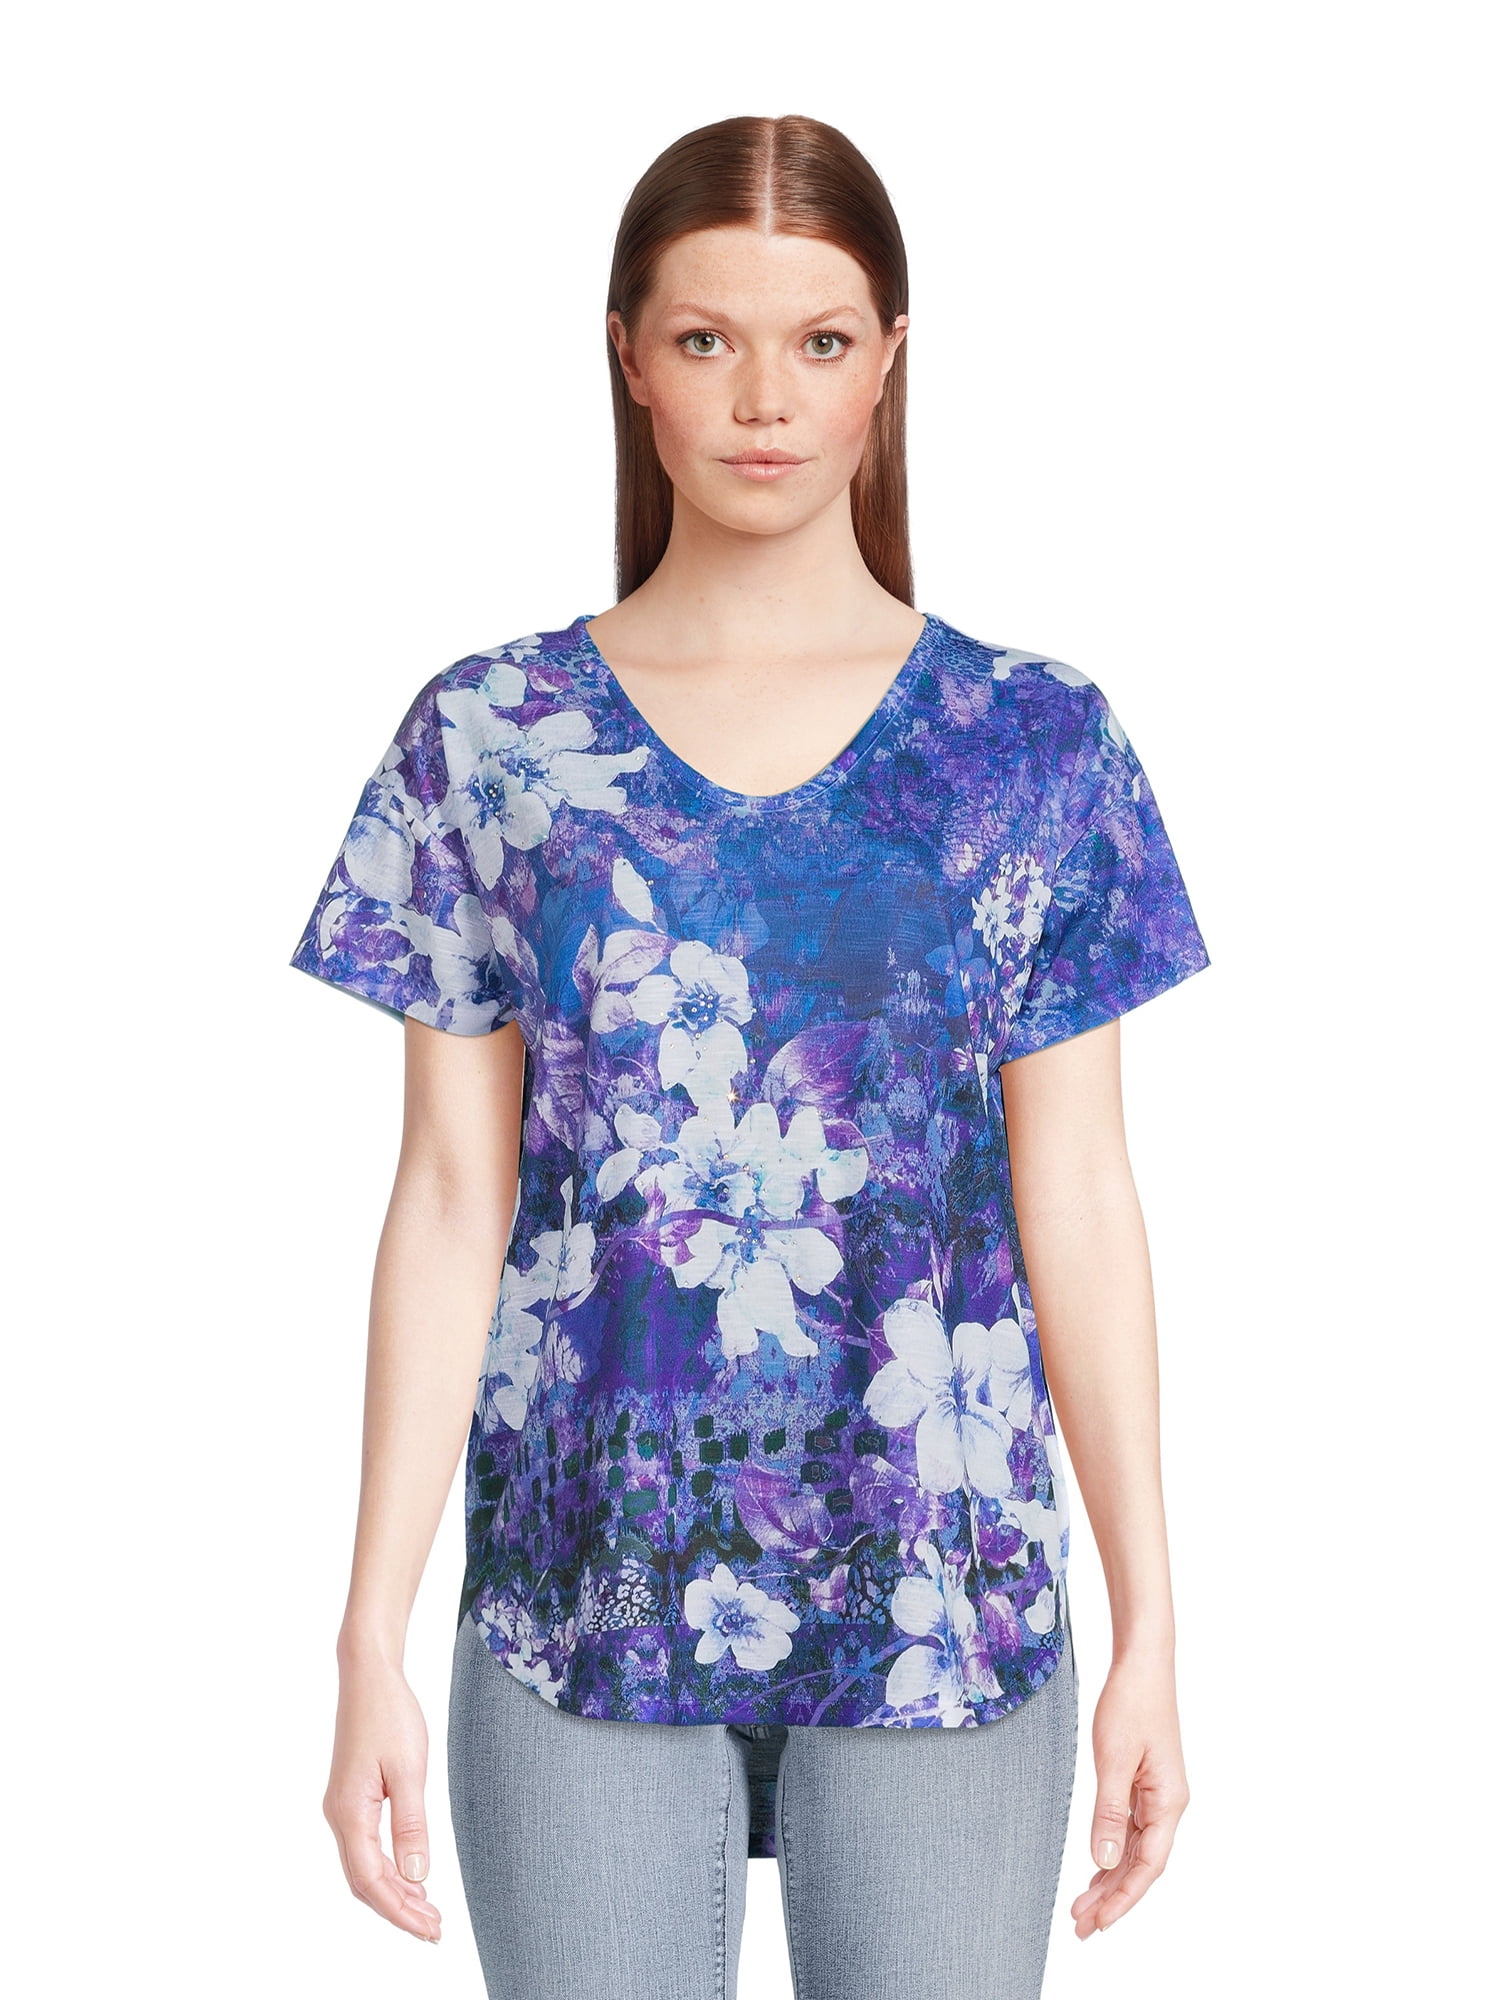 Concepts Women's Sublimation Print Top with Short Sleeves - Walmart.com